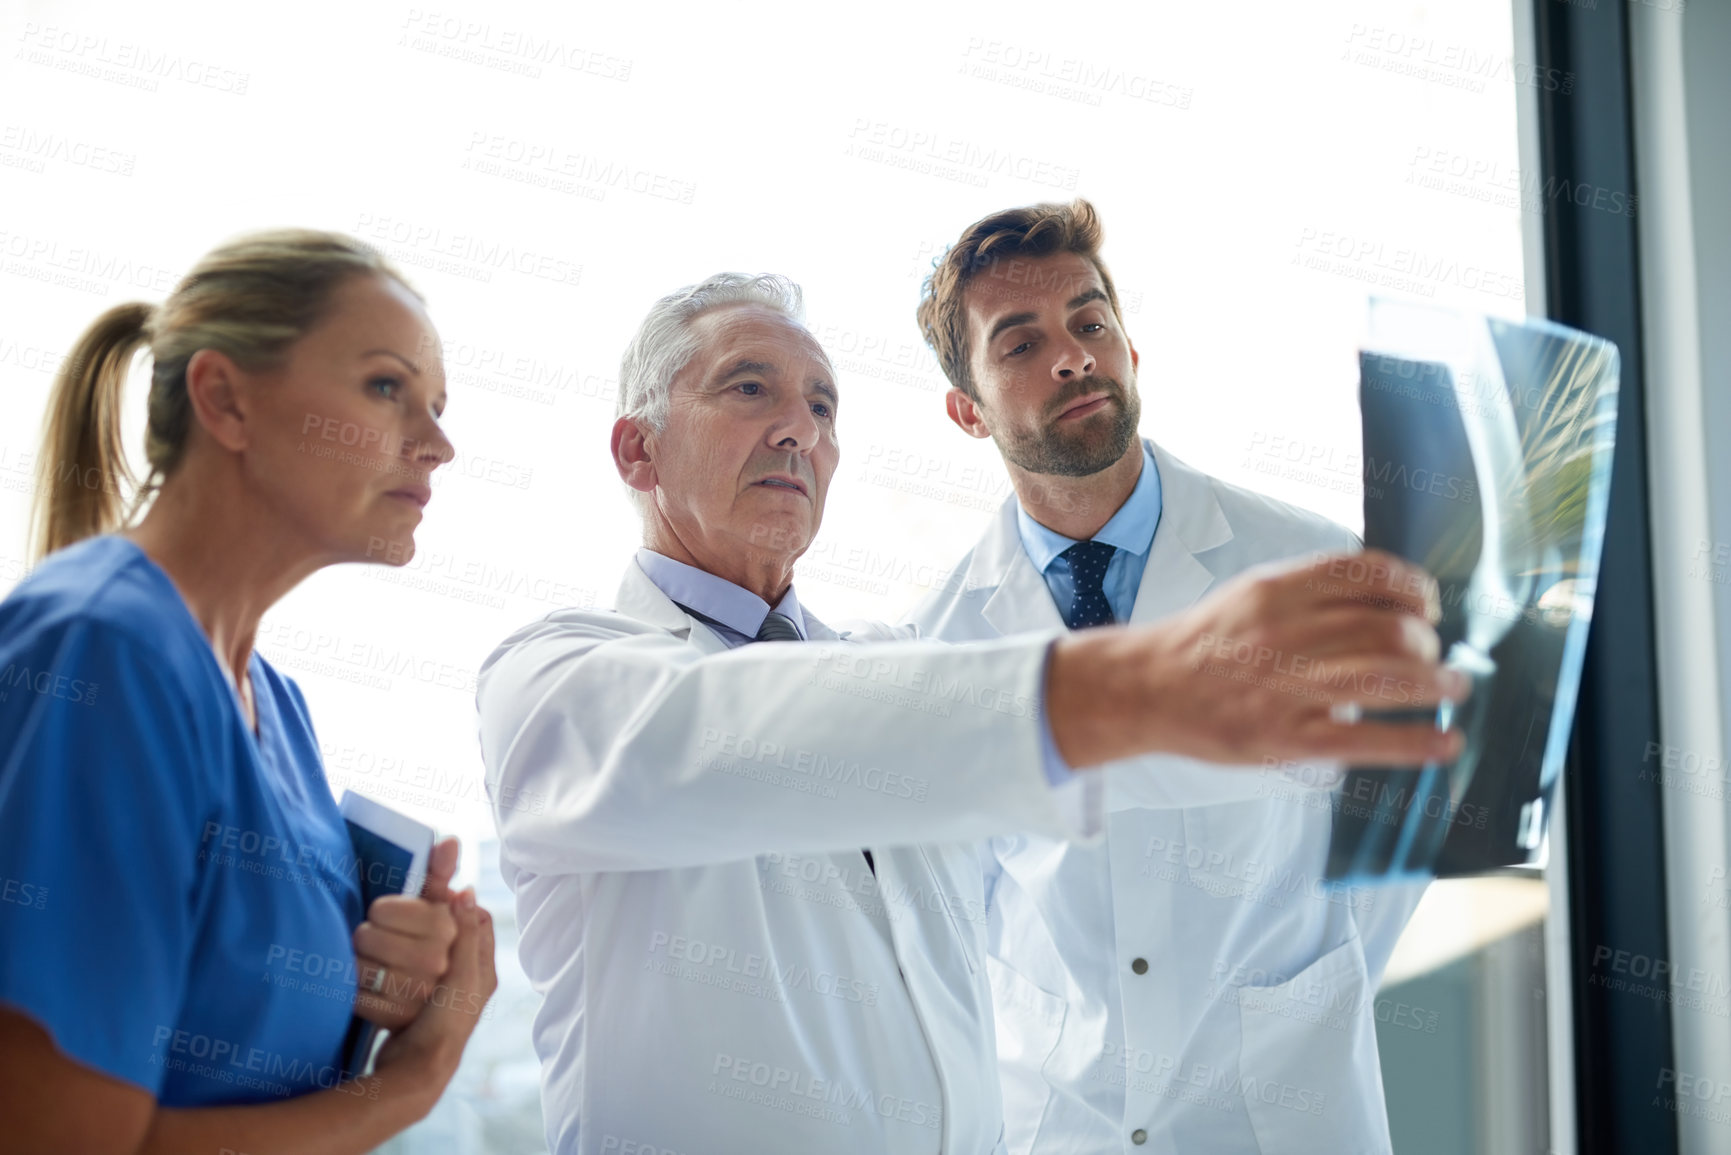 Buy stock photo Cropped shot of a group of medical practitioners examining an x-ray together